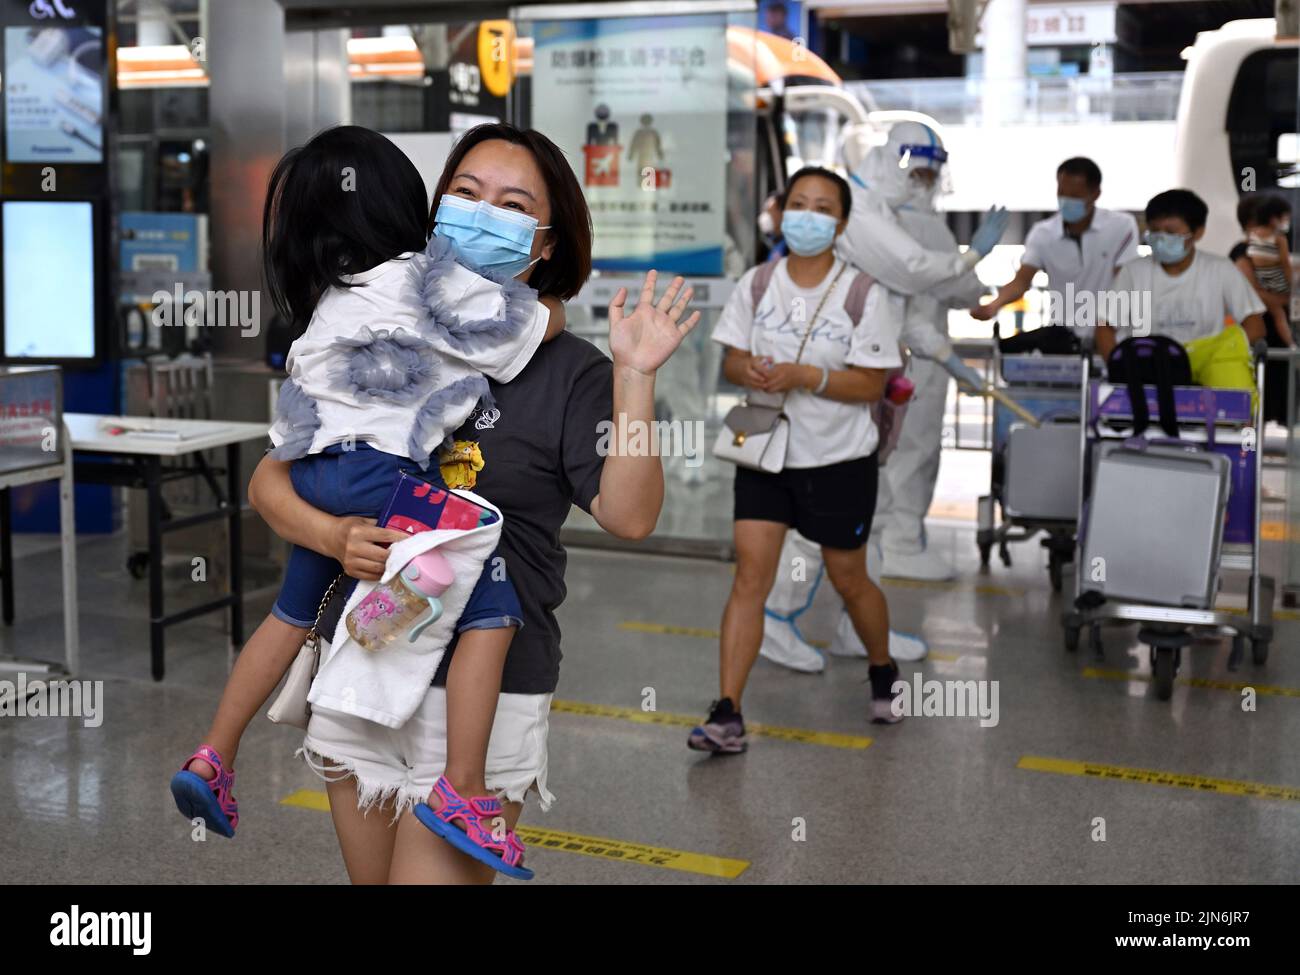 (220809) -- SANYA, Aug. 9, 2022 (Xinhua) -- Stranded tourists prepare to board their flight at Sanya Phoenix International Airport in Sanya, south China's Hainan Province, Aug. 9, 2022.  The first batch of 125 tourists stranded in Sanya due to the latest COVID-19 resurgence have flown to Xi'an on Tuesday.   Hainan authorities have taken measures to arrange return trips for stranded tourists who meet specific epidemic control requirements. (Xinhua/Guo Cheng) Stock Photo